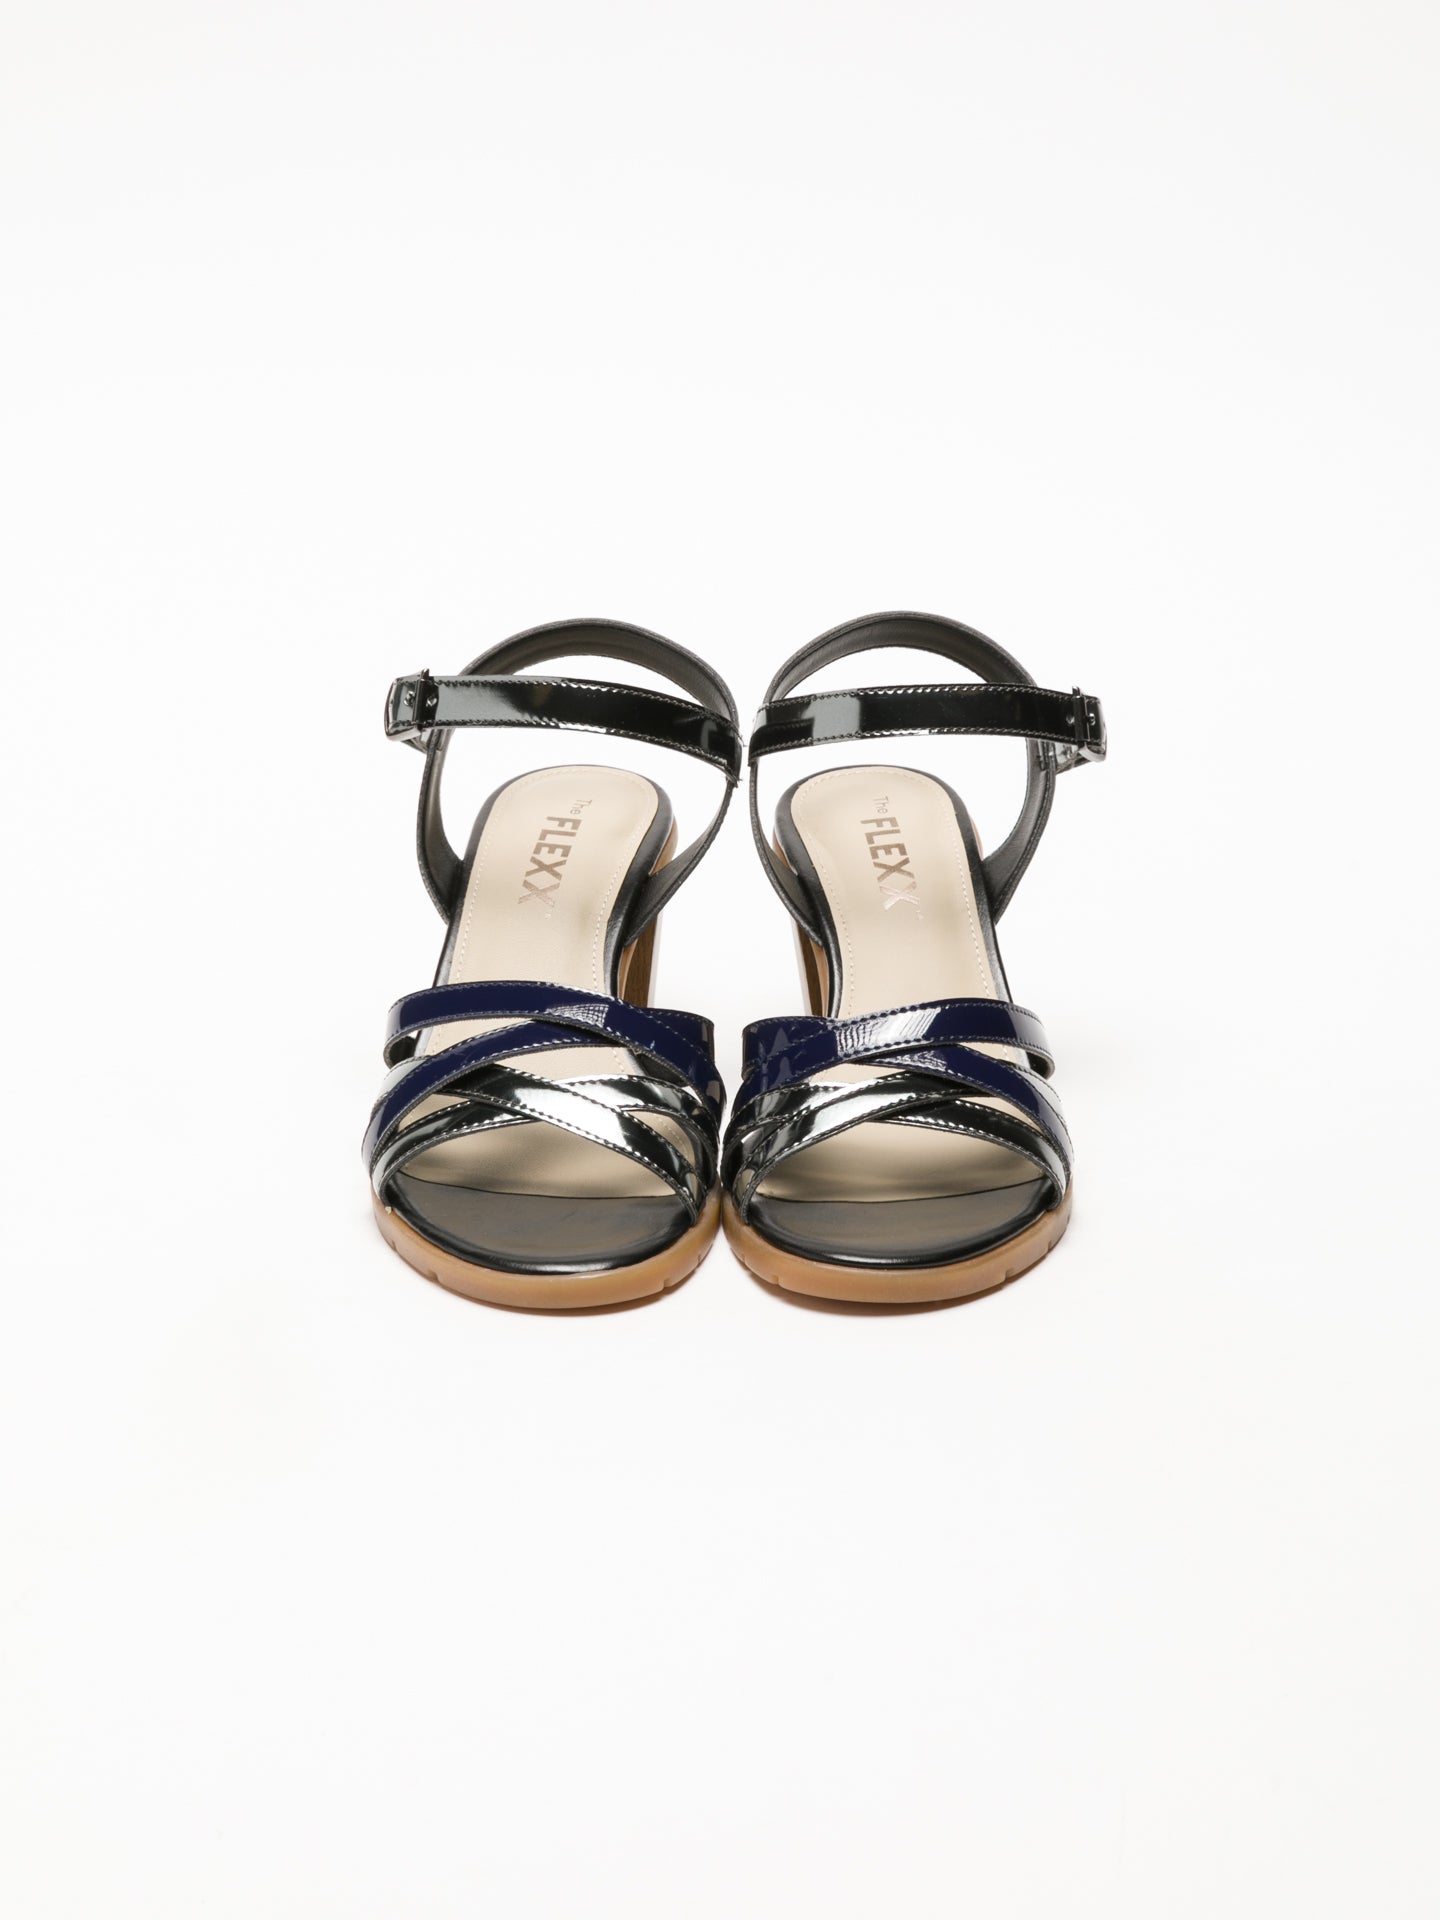 The Flexx Navy and Silver Buckle Sandals